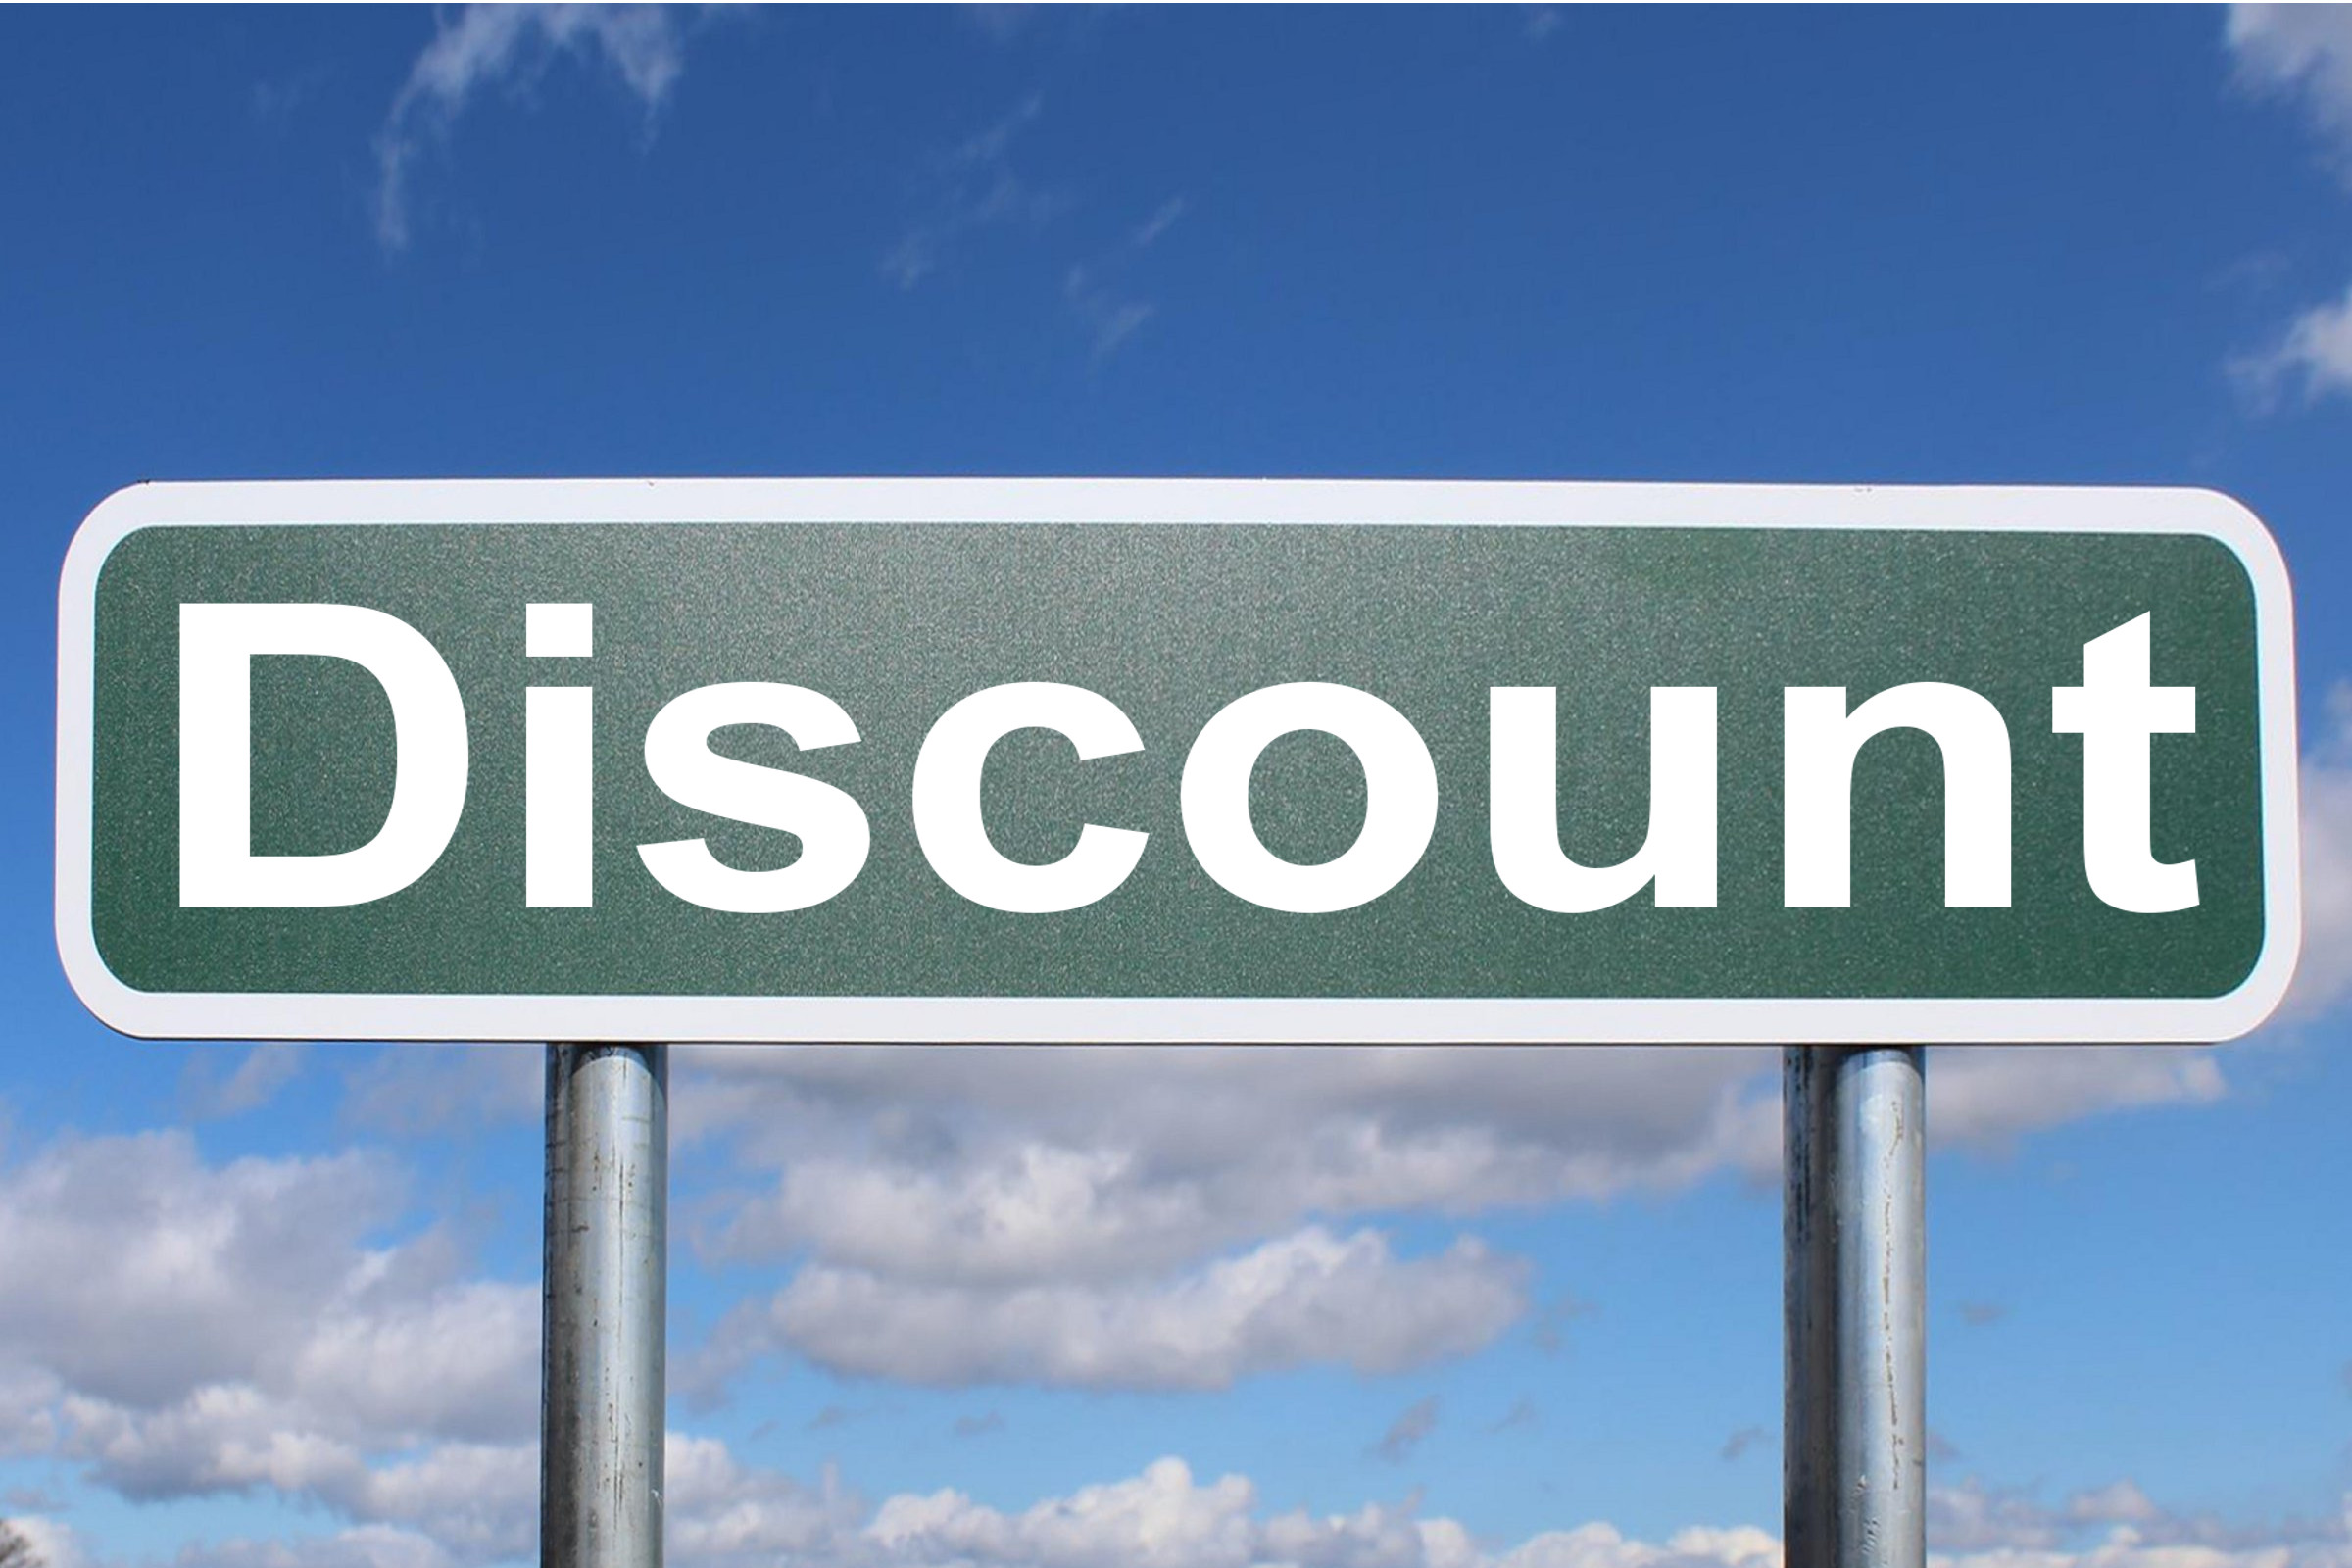 Even more discounts? We're spoiling you...